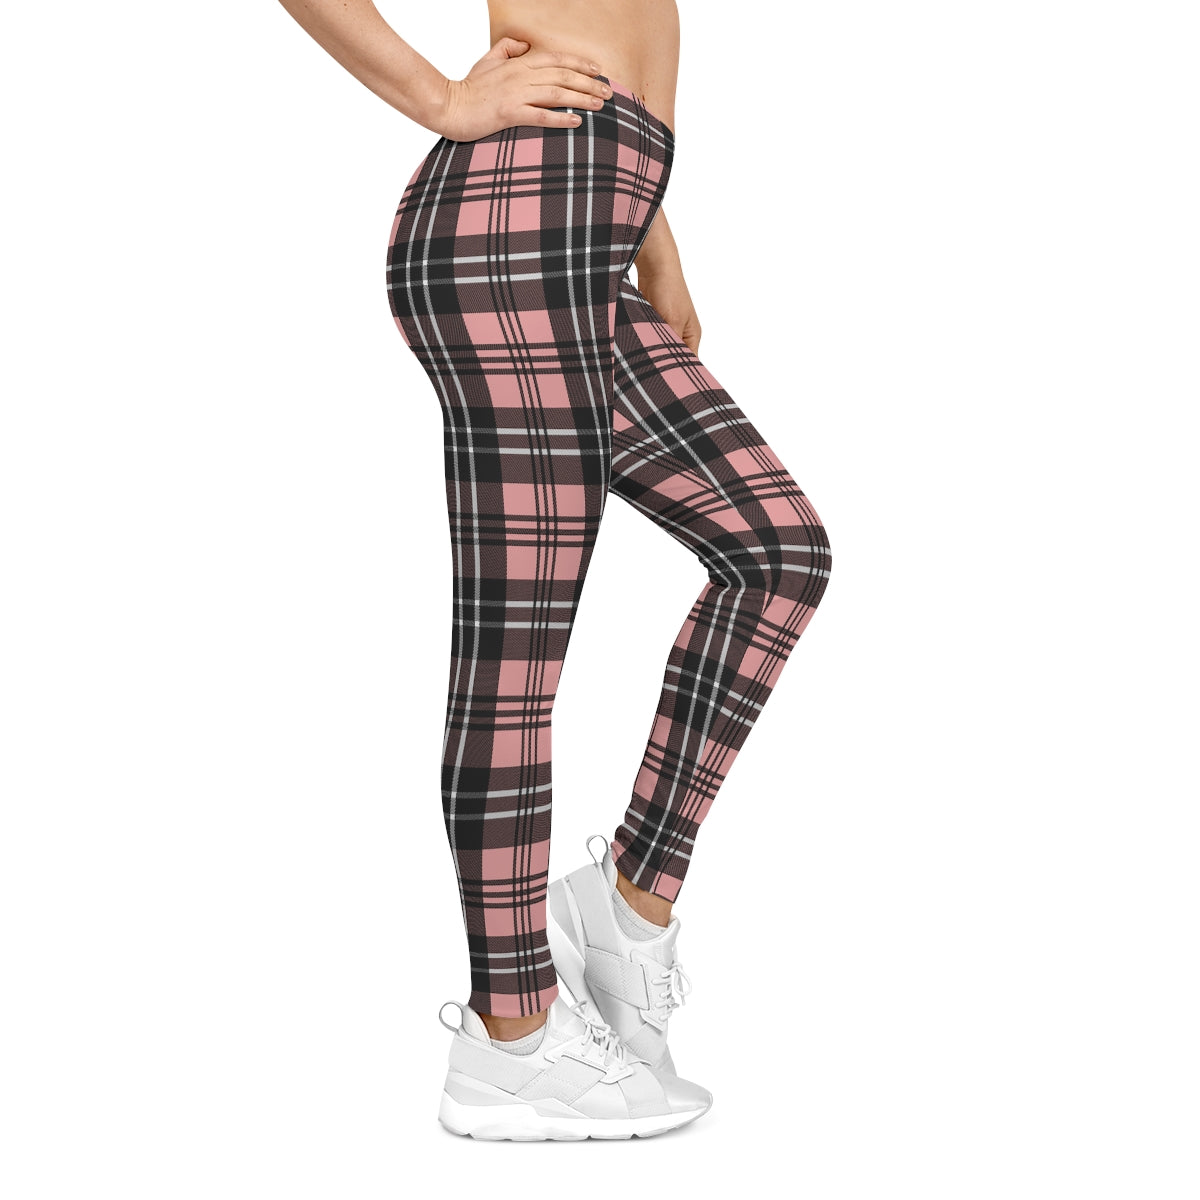 Pink Plaid Leggings, Women's All Over Print Cute Trendy Workout Yoga Pants,